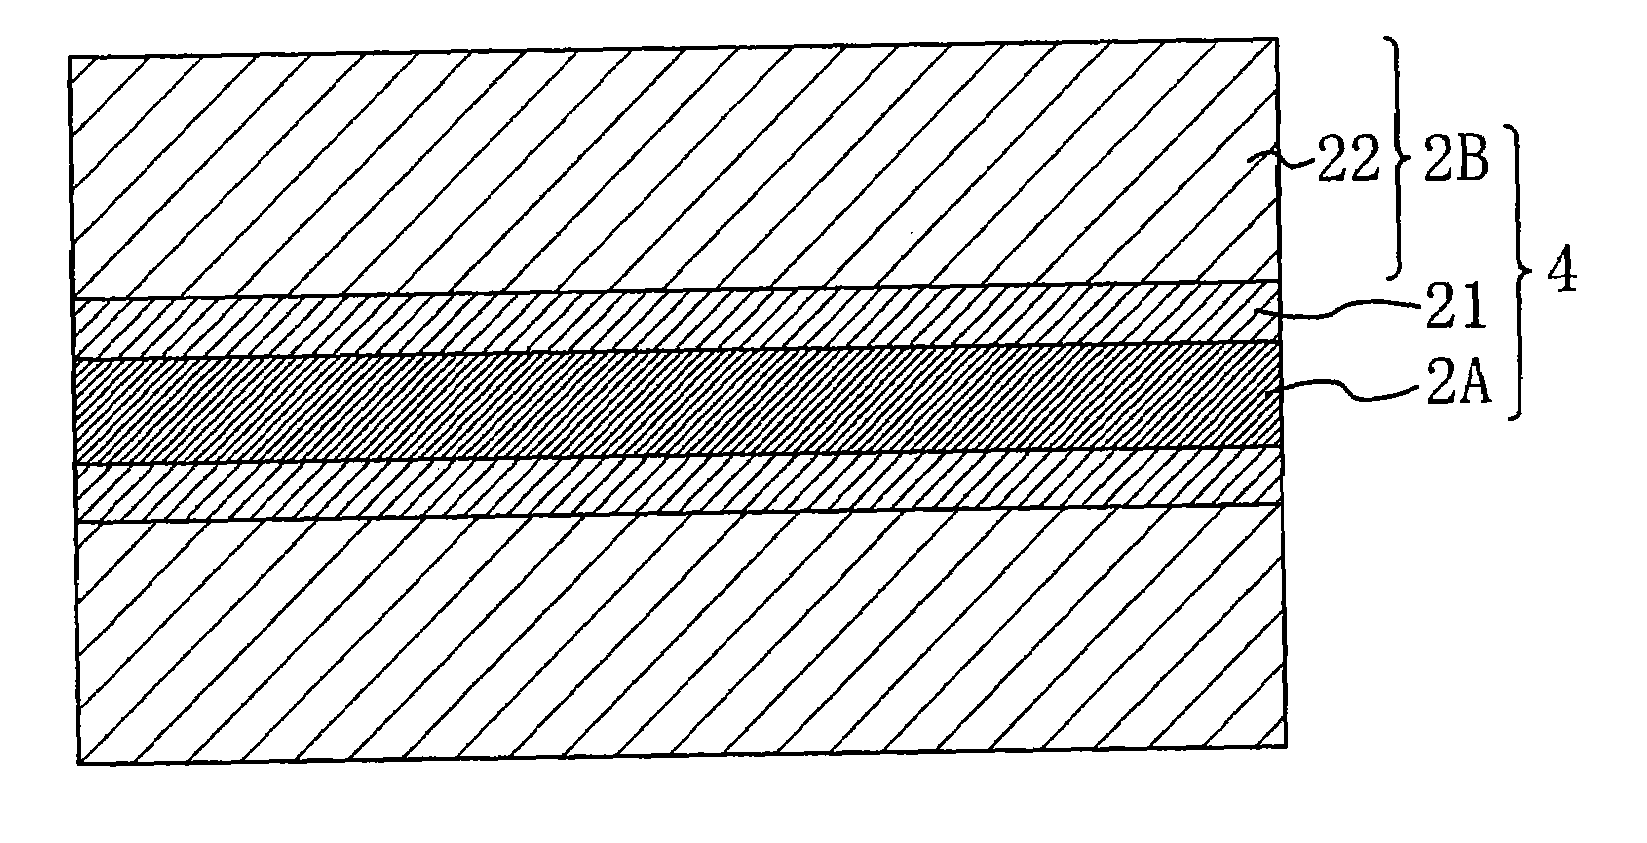 Nonaqueous electrolyte secondary battery and method for manufacturing positive electrode of nonaqueous electrolyte secondary battery